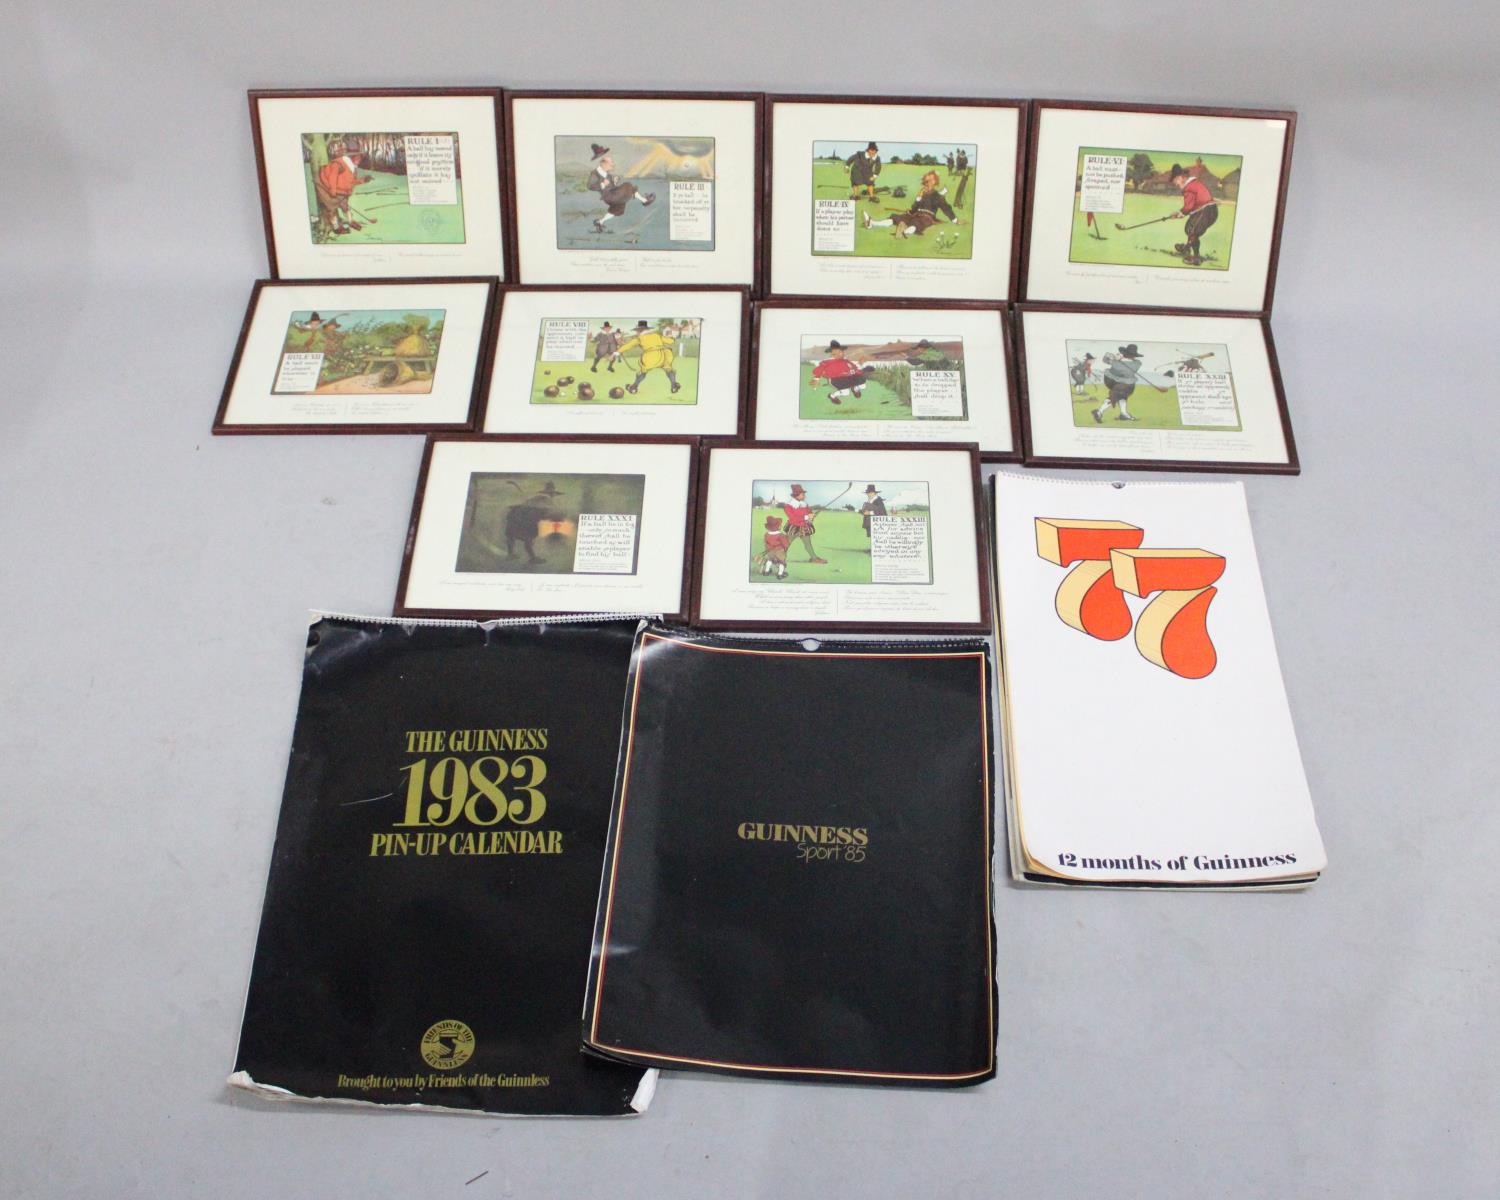 Three 1970s/80s Guinness Calendars Together with Ten Framed Perrier Water Golfing Cartoons